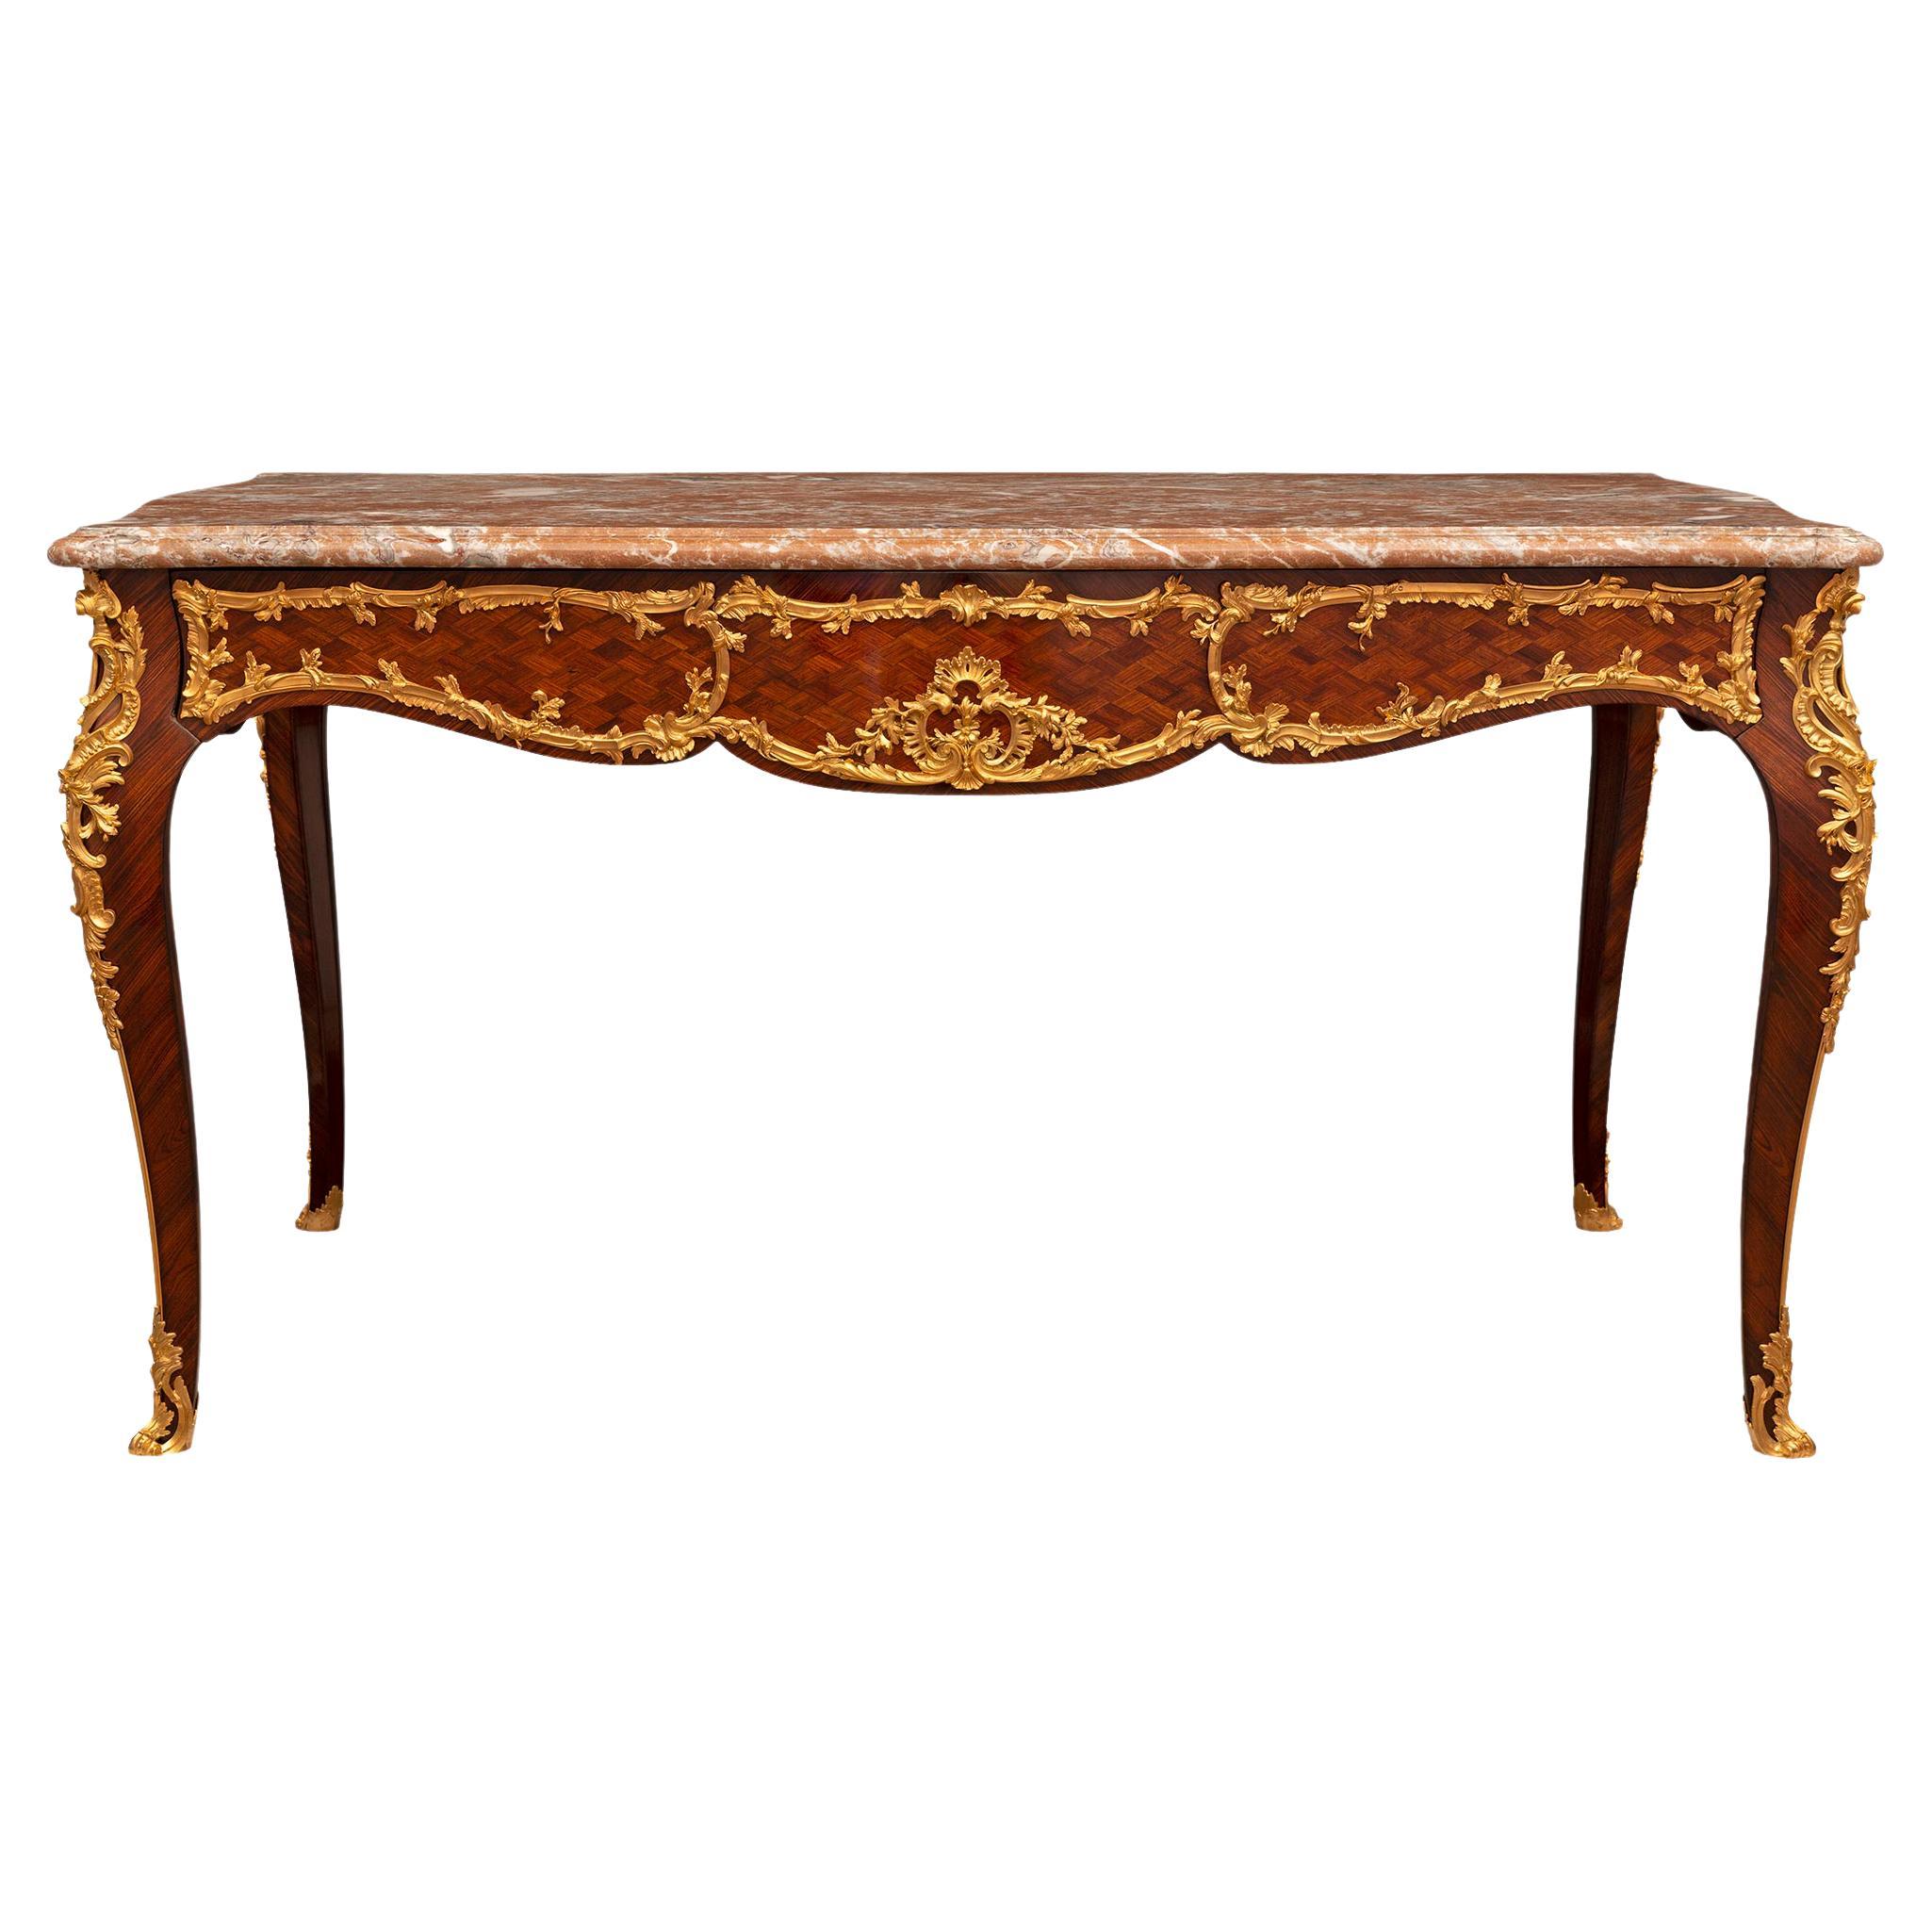 French 19th Century Louis XV Style Tulipwood and Ormolu Center Table For Sale